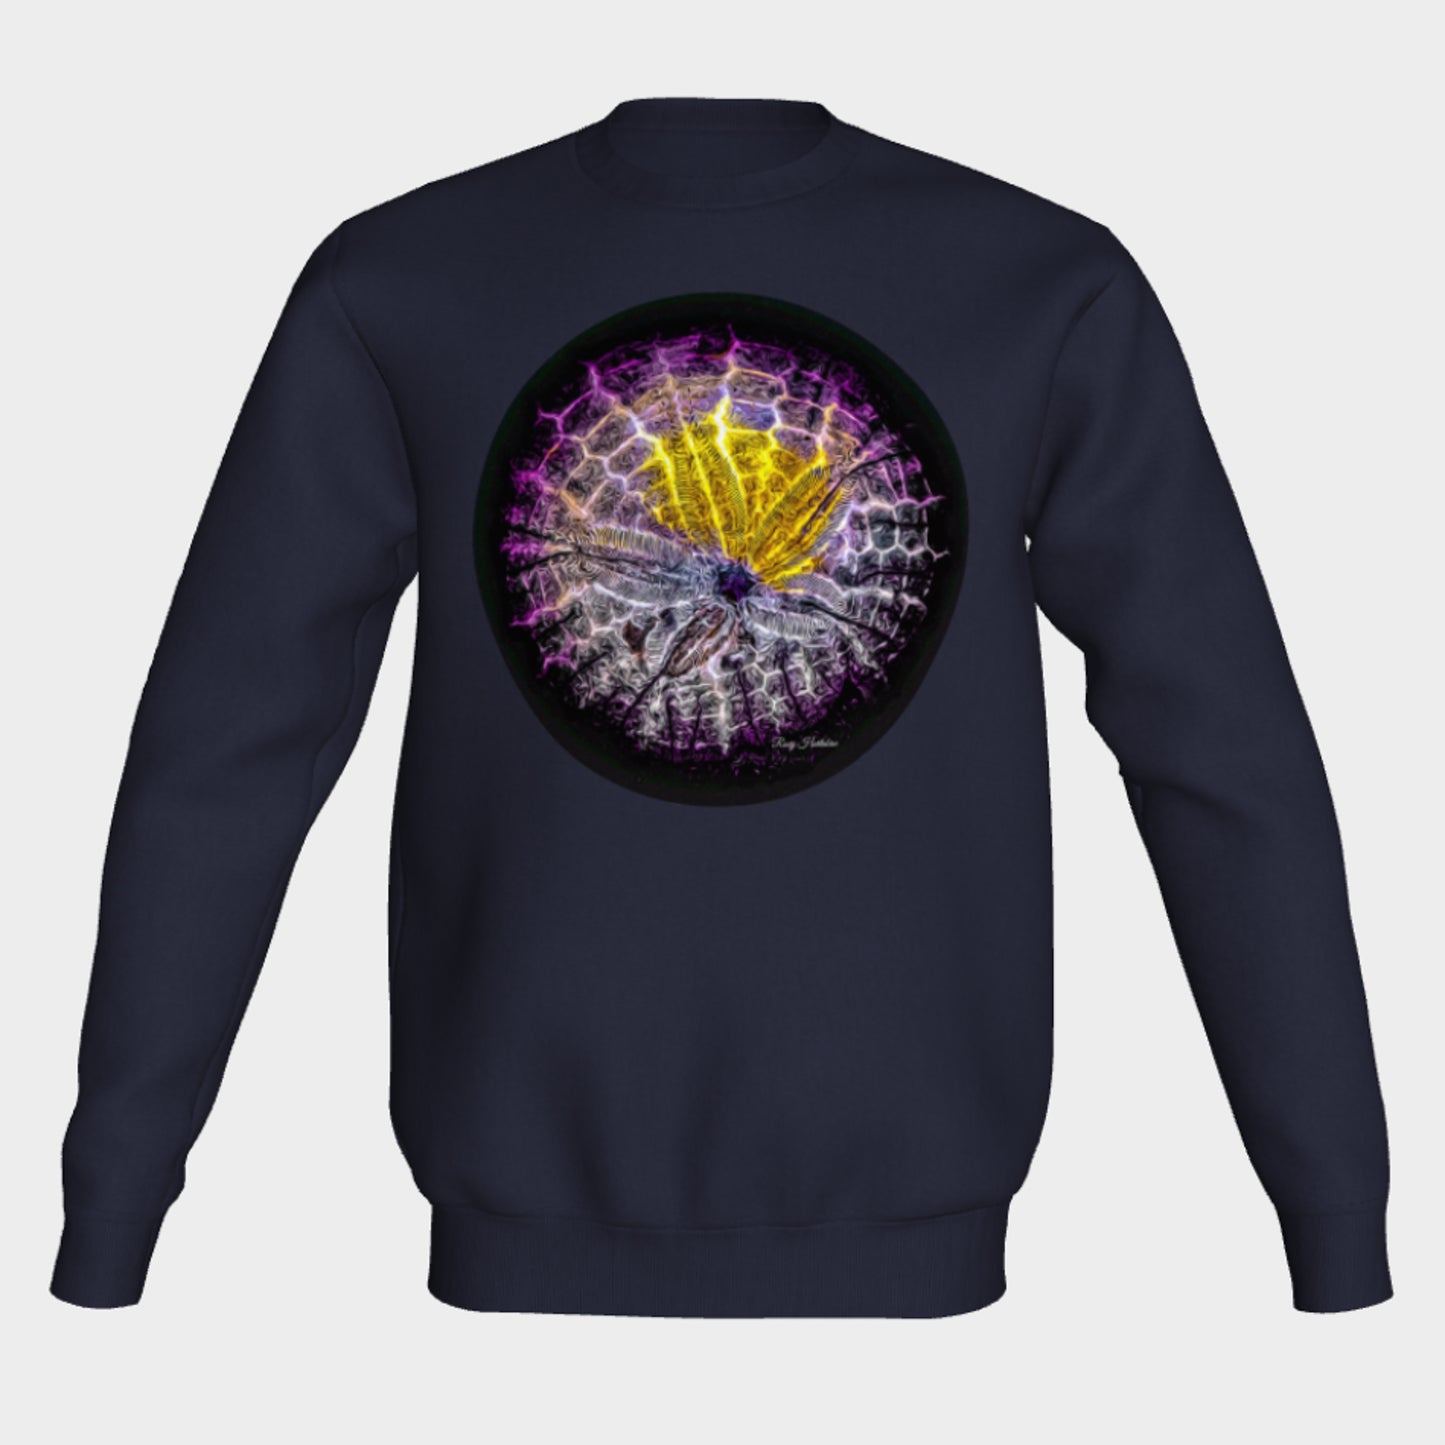 Spotlight Sand Dollar Crewneck Sweatshirt What’s better than a super cozy sweatshirt? A super cozy sweatshirt from Van Isle Goddess!  Super cozy unisex sweatshirt for those chilly days.  Excellent for men or women.   Fit is roomy and comfortable.